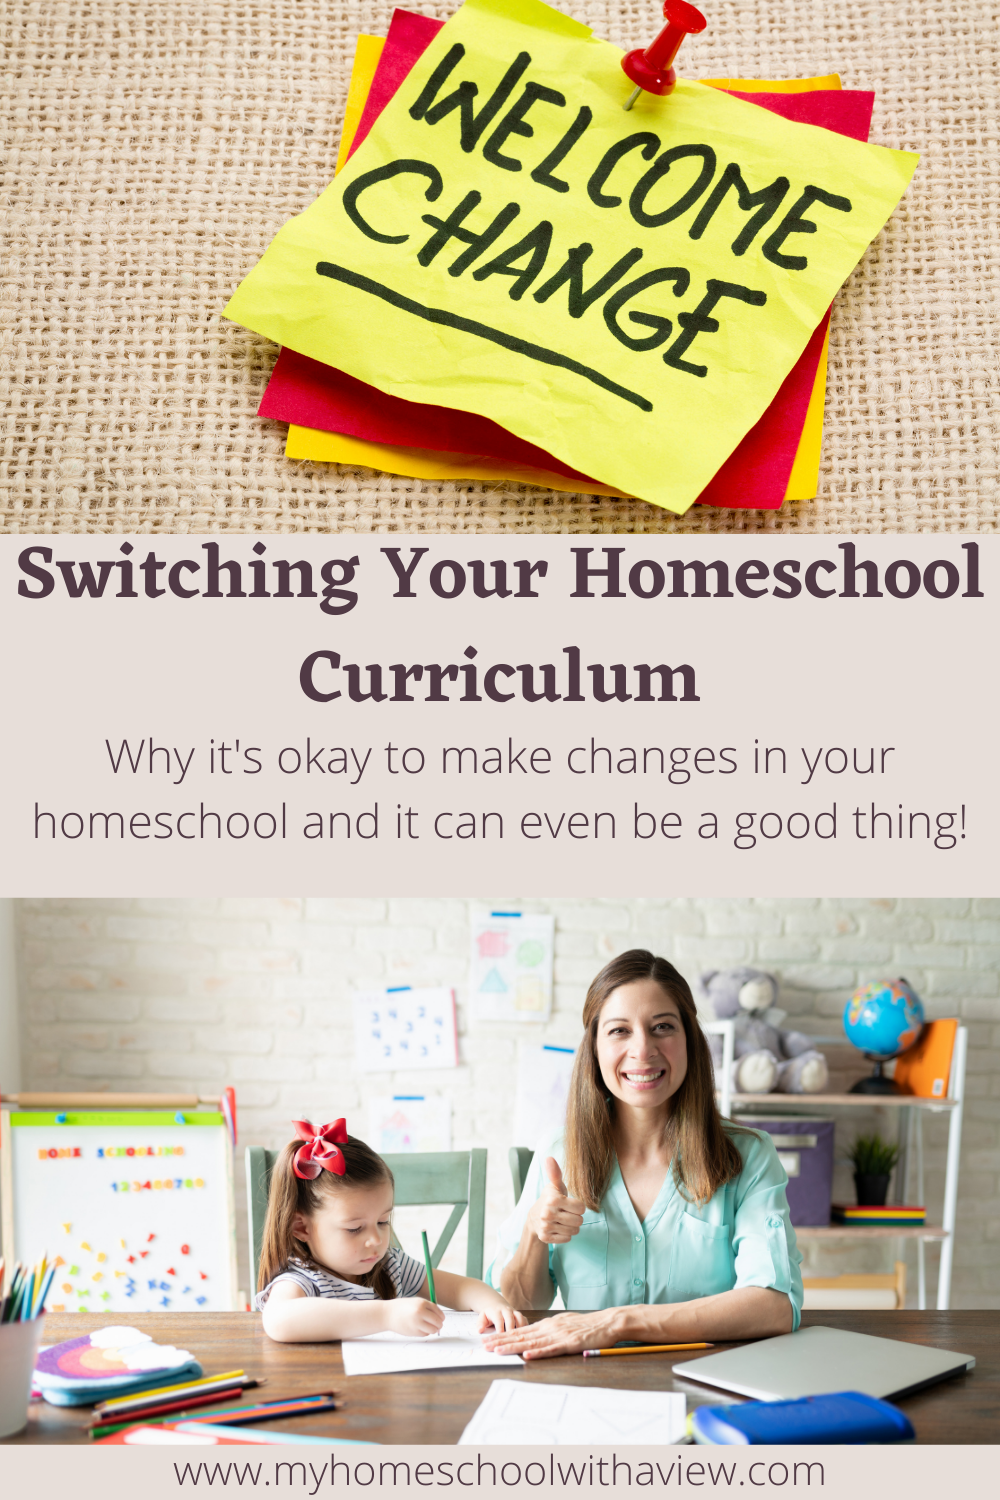 Switching Your Homeschool Curriculum Pinterest Image